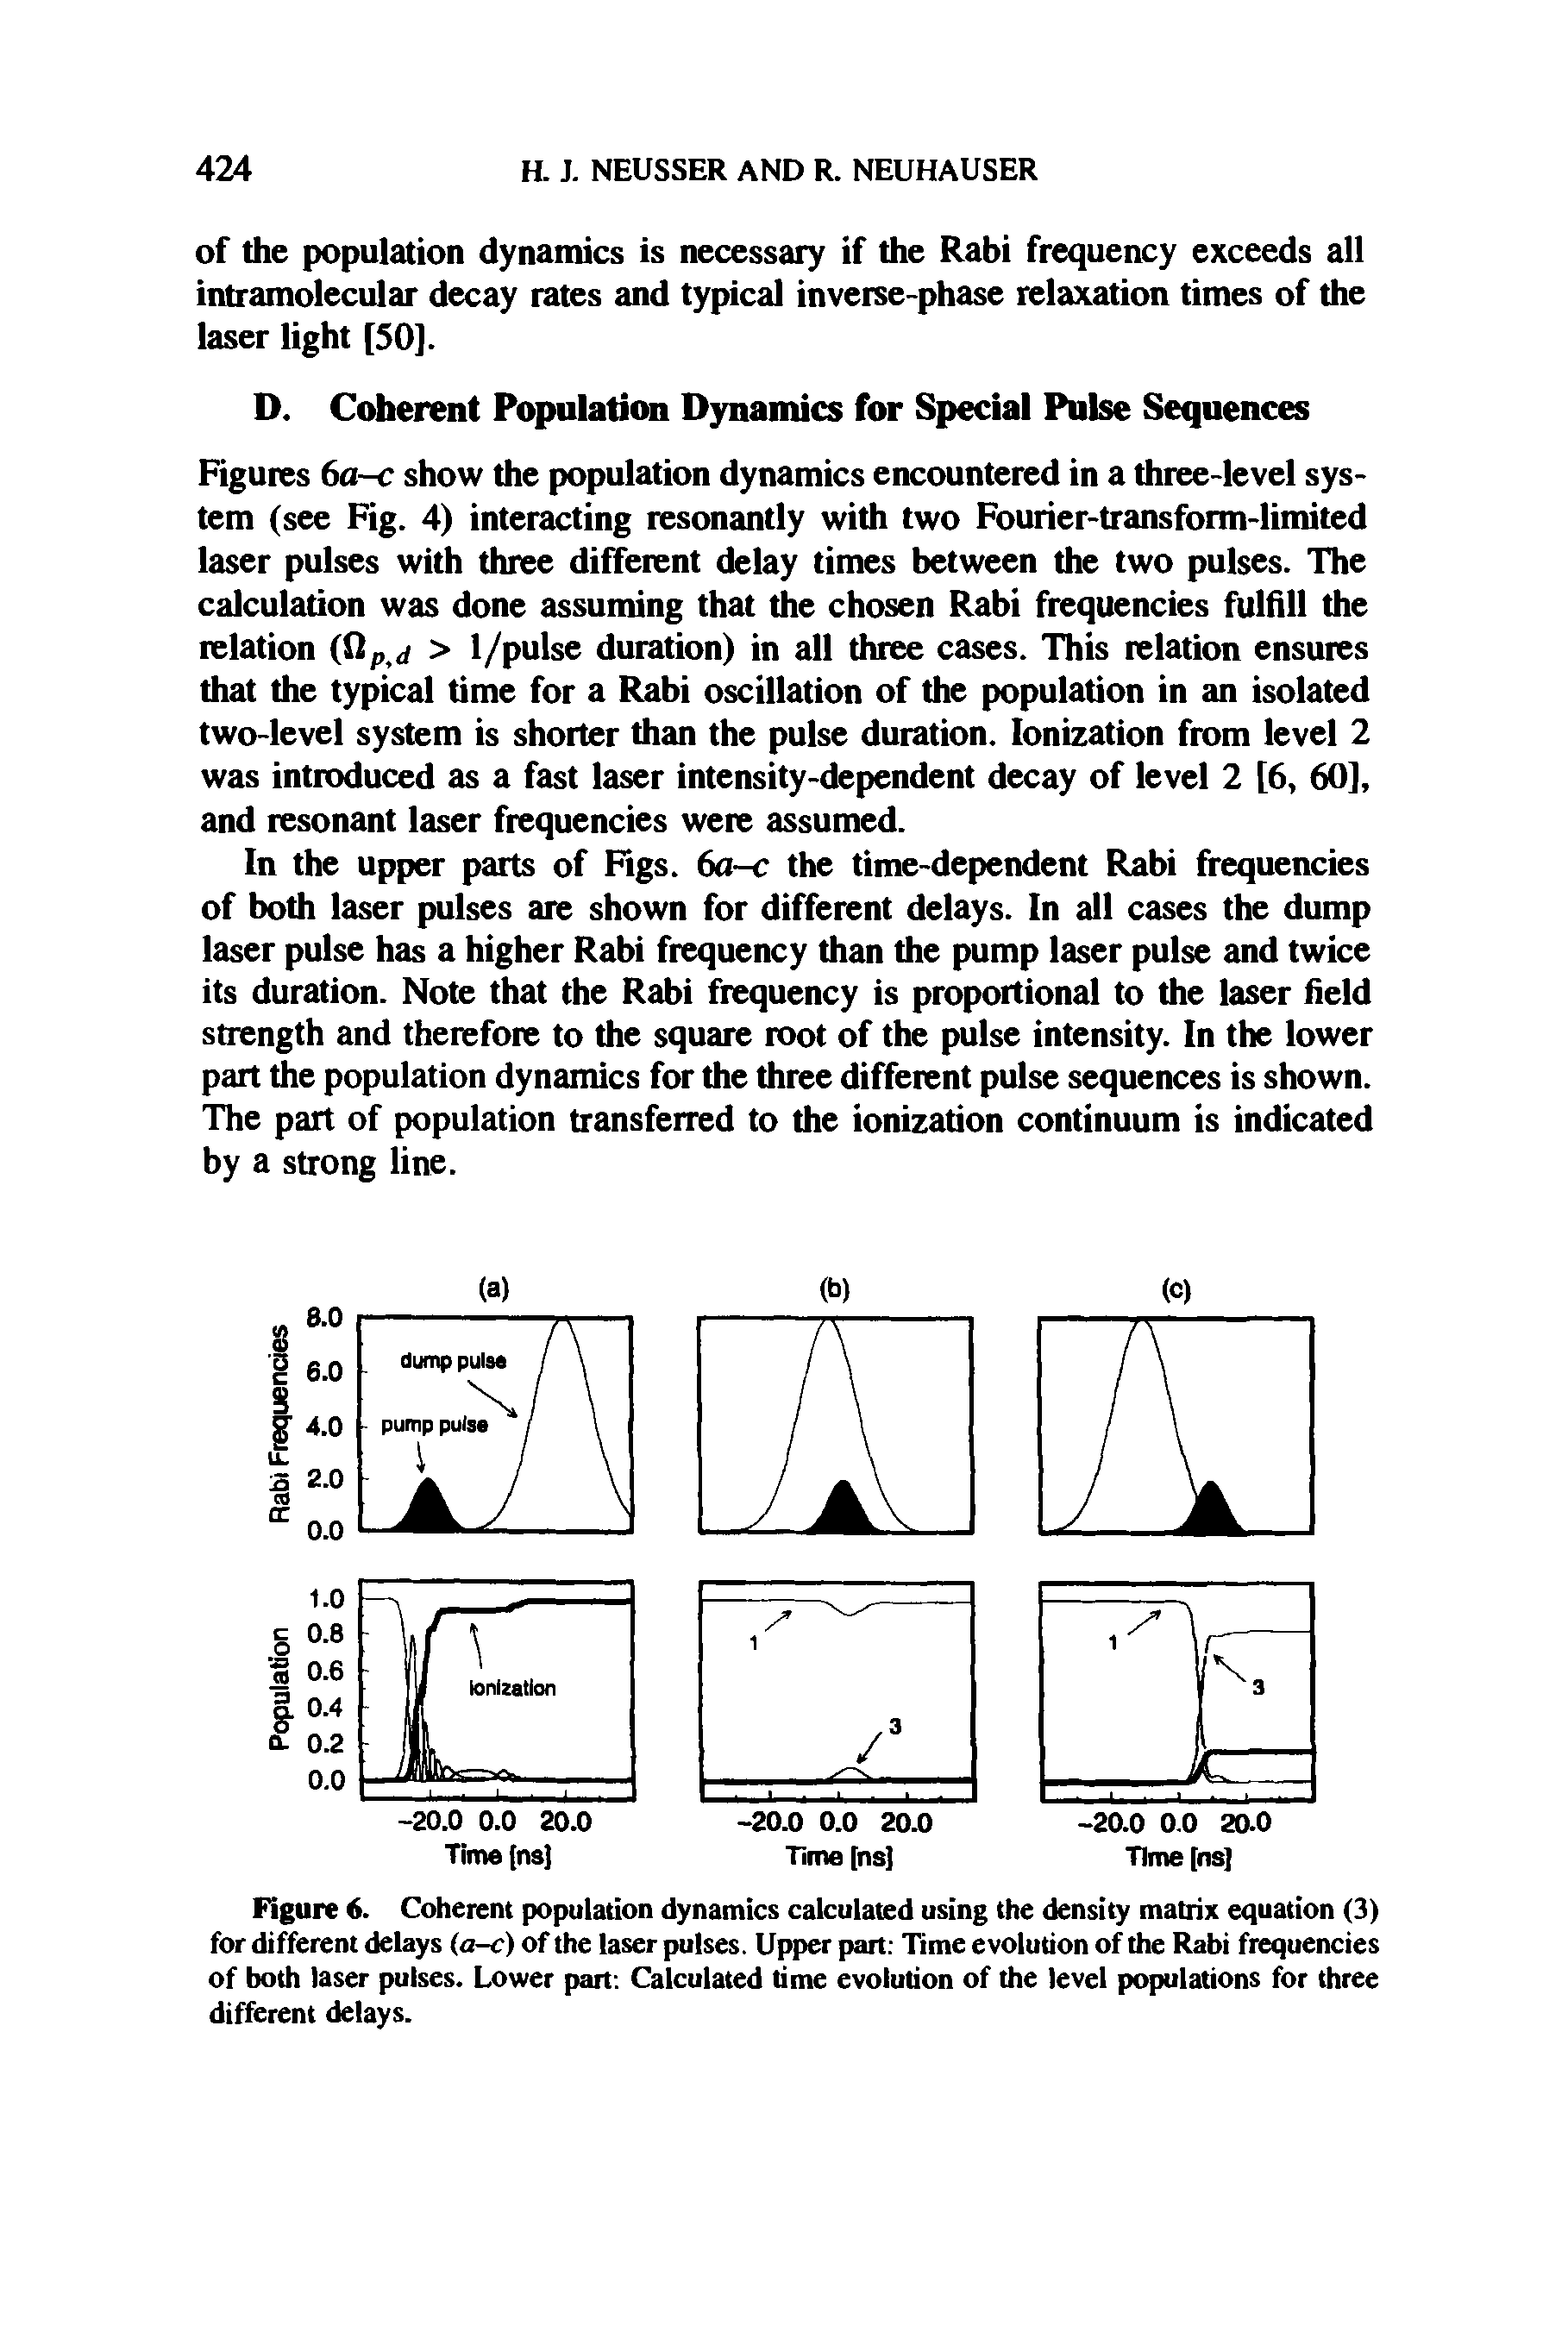 Figure 6. Coherent population dynamics calculated using the density matrix equation (3) for different delays (a-c) of the laser pulses. Upper part Time evolution of the Rabi frequencies of both laser pulses. Lower part Calculated time evolution of the level populations for three different delays.